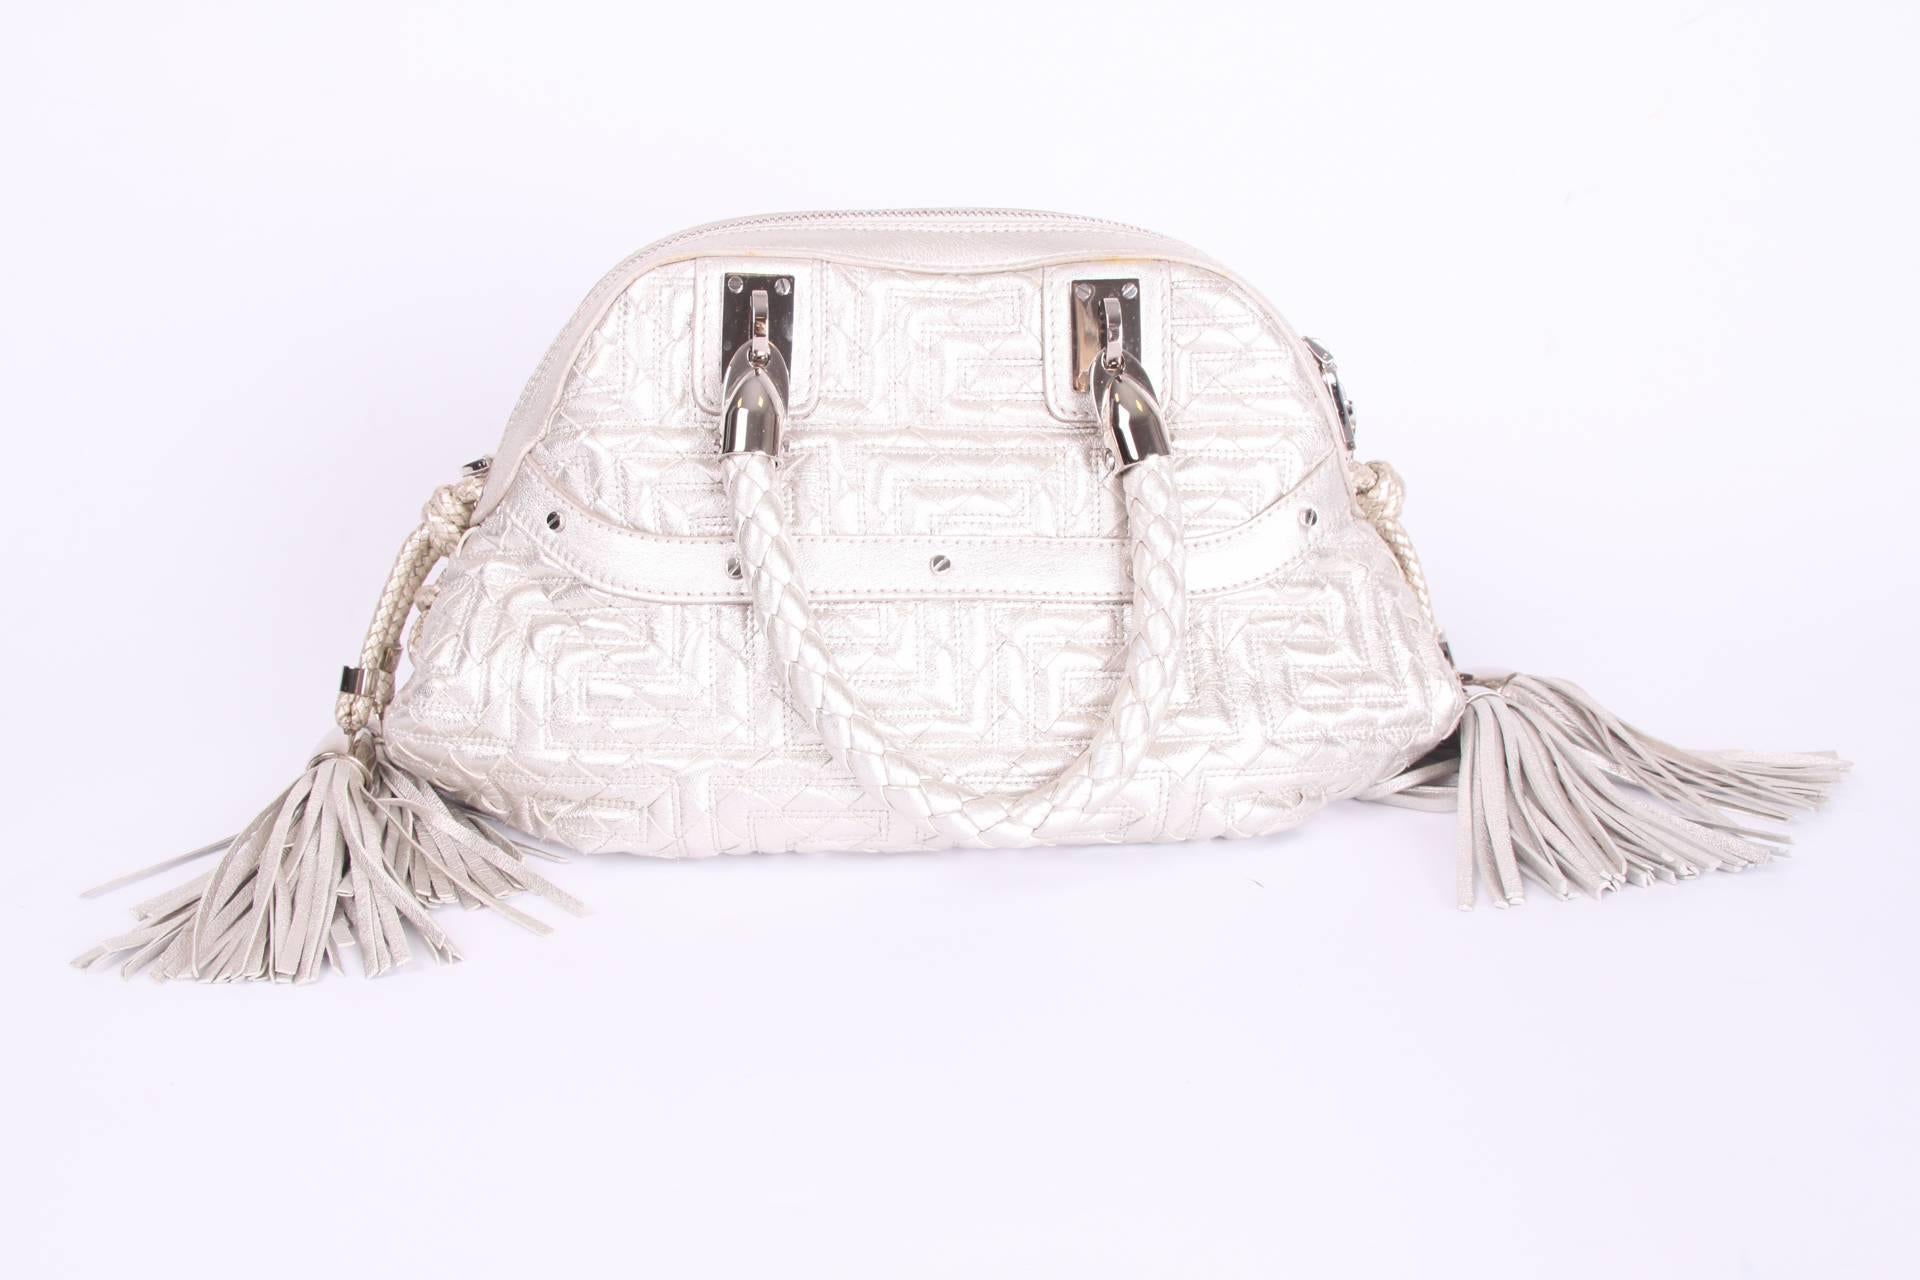 Wonderful top-handle bag by Gianni Versace Couture crafted in metallic silver-tone leather.

Two braided handles on top, zip top closure. On both sides of the bag two large braided leather tassels and a front pocket with a zipper. A shiny